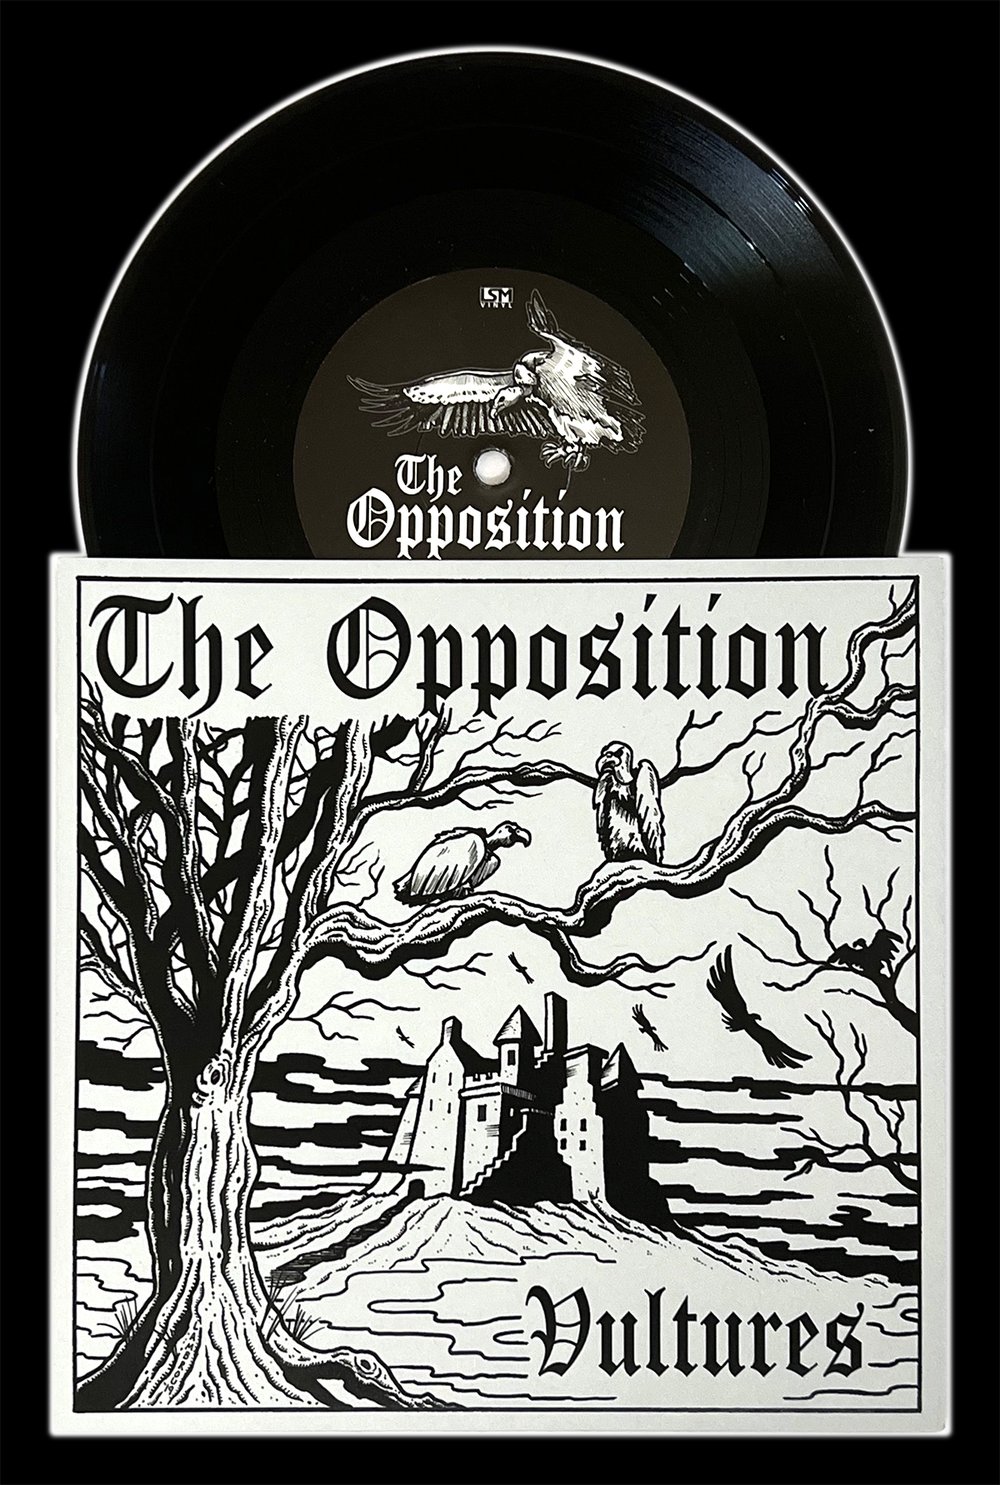 THE OPPOSITION 'Vultures' 7" EP